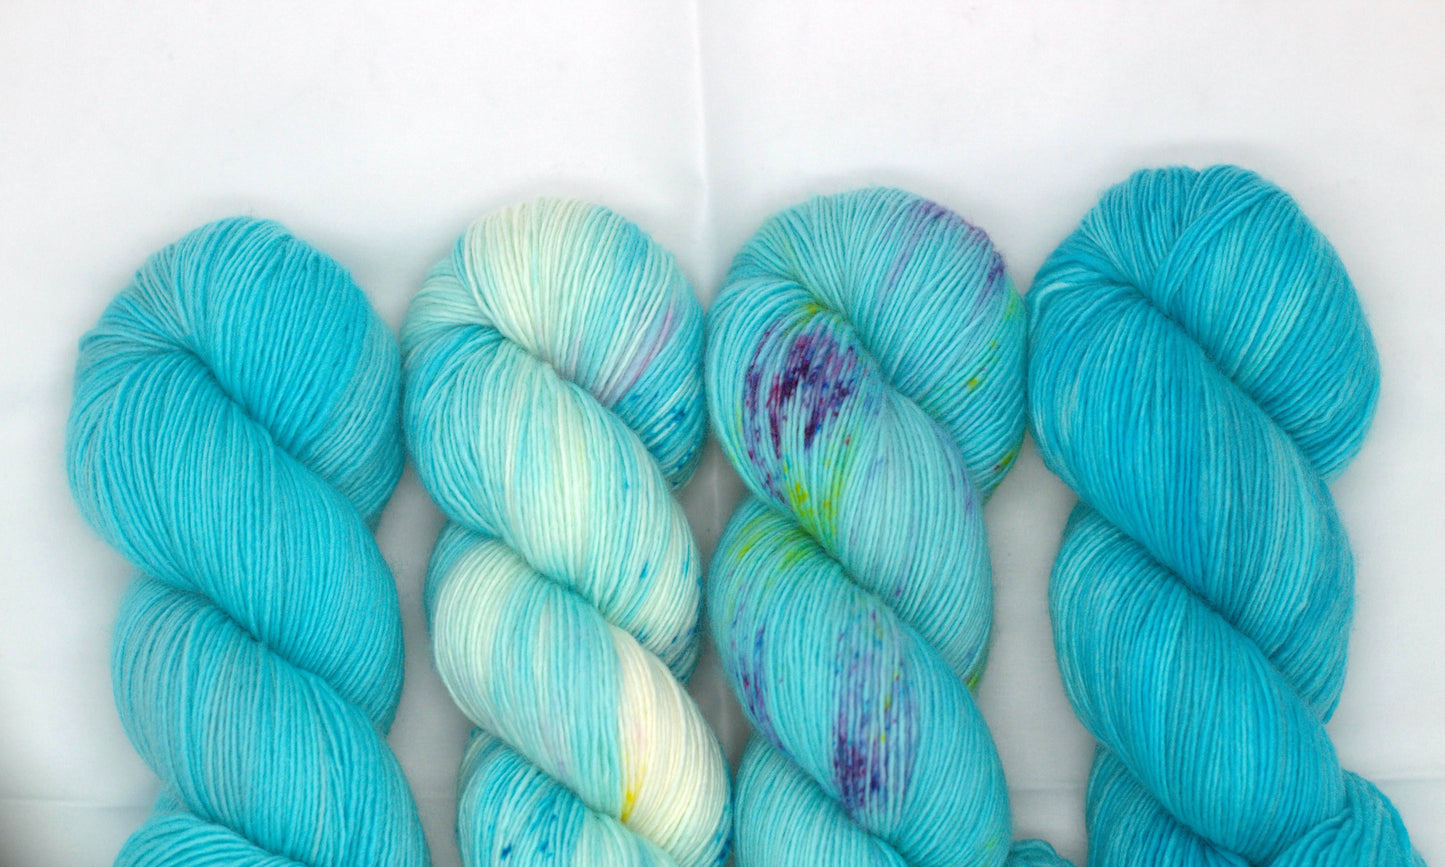 Four twisted complimentary skeins in varying shades of turquoise on white background.